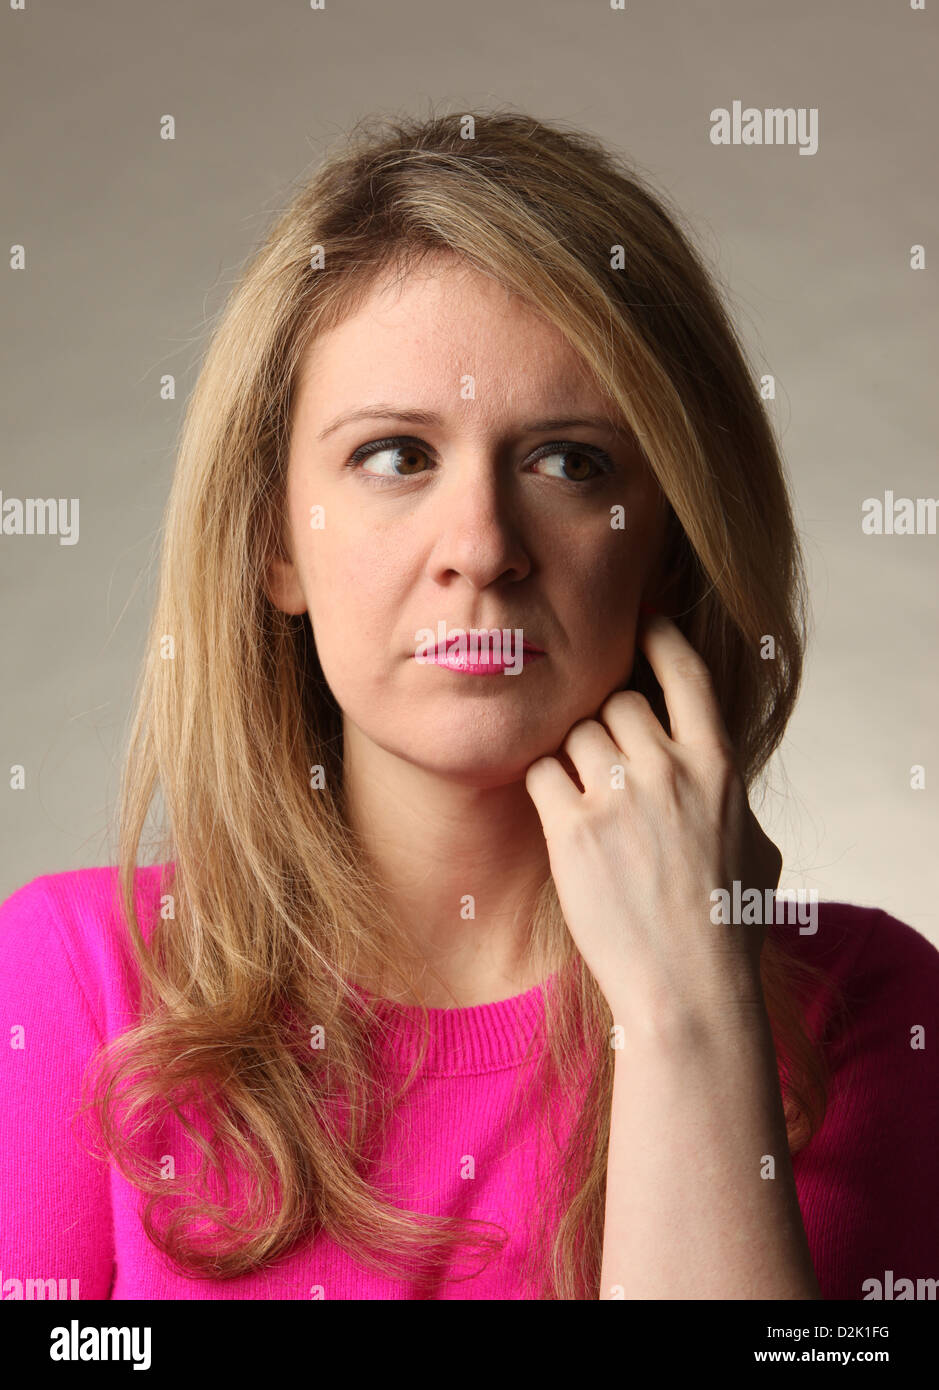 Pensive young blond woman with hand on face looking away, January 23, 2013, © Katharine Andriotis Stock Photo